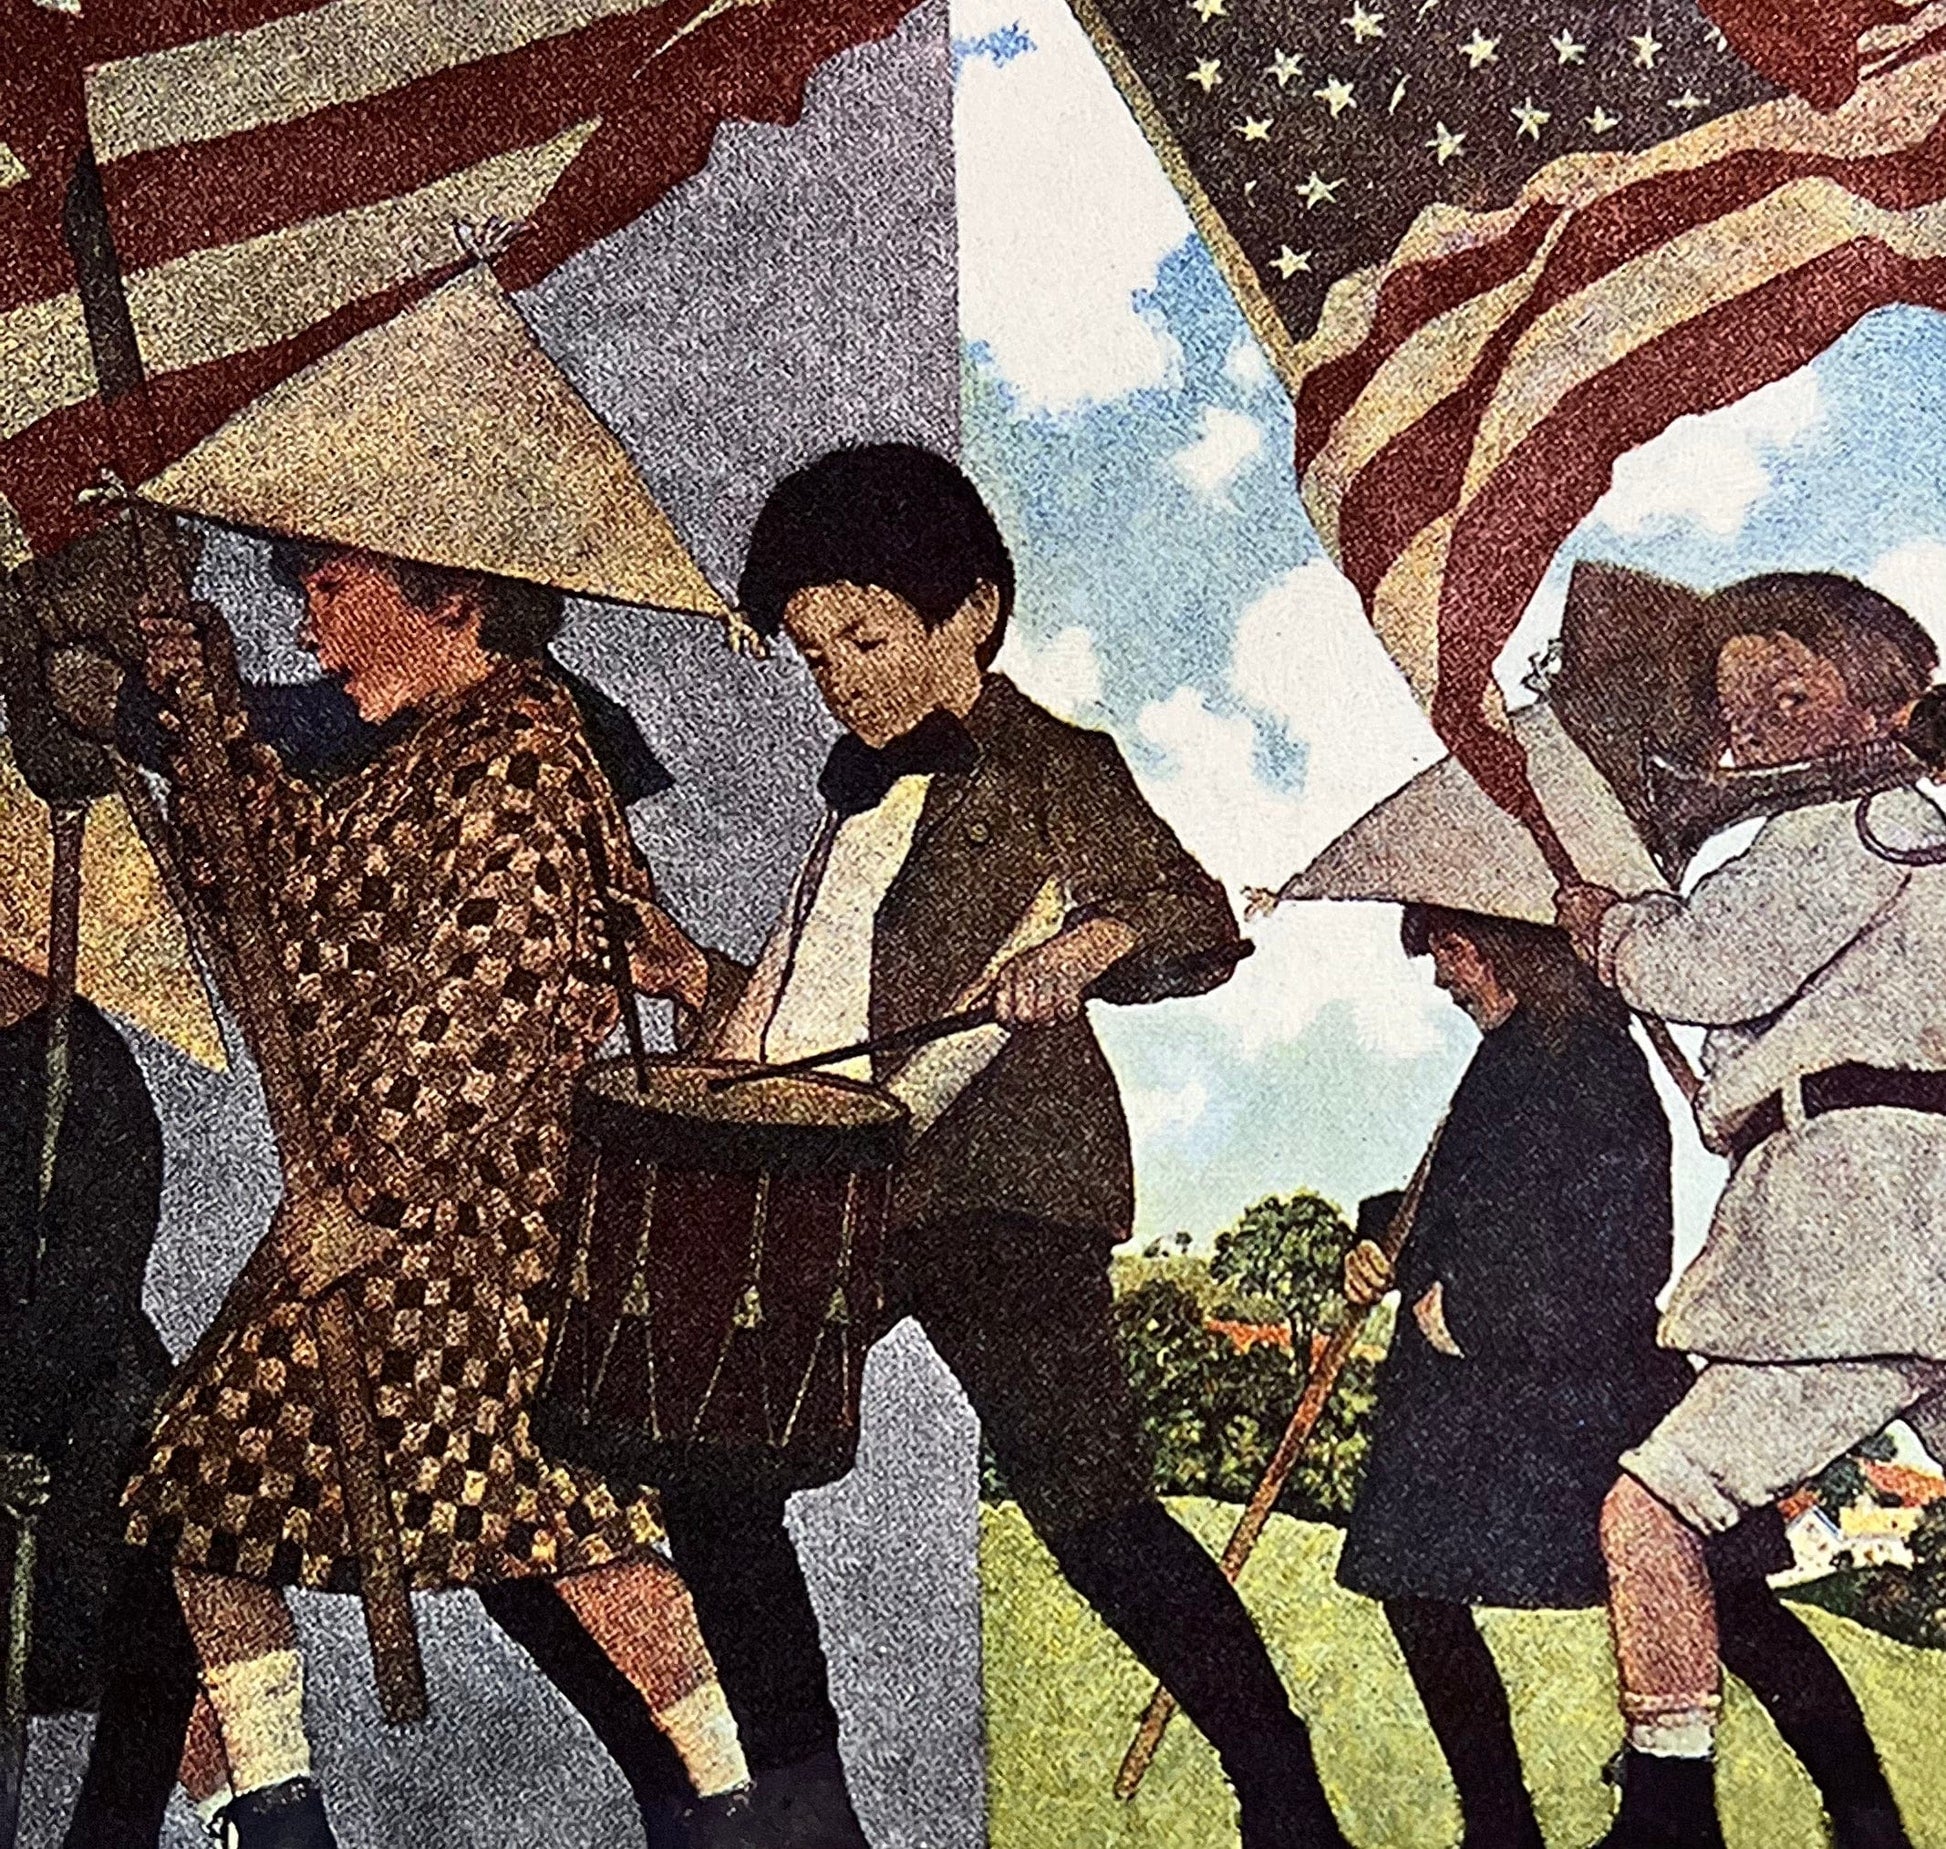 Close-up of drummer boy in Star-Spangled Banner Illustration and Verse — Archival print from The History List store